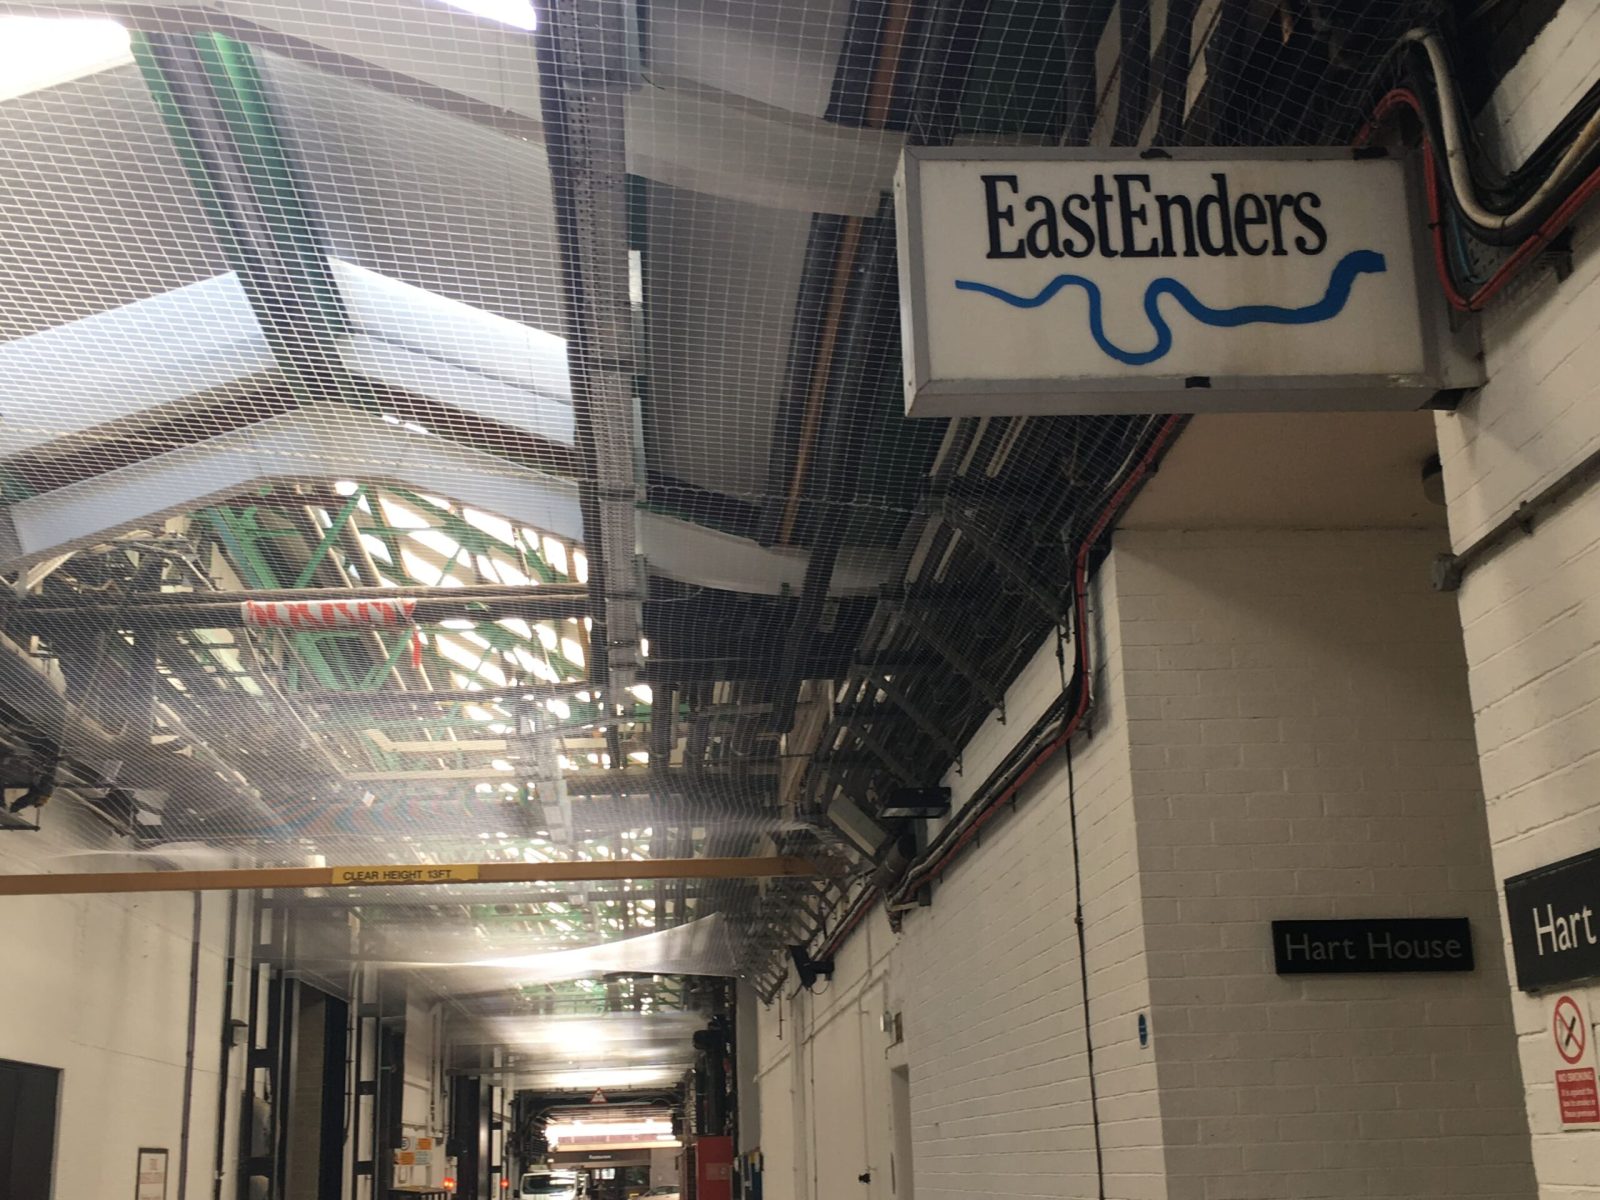 Bird control netting for Eastenders building